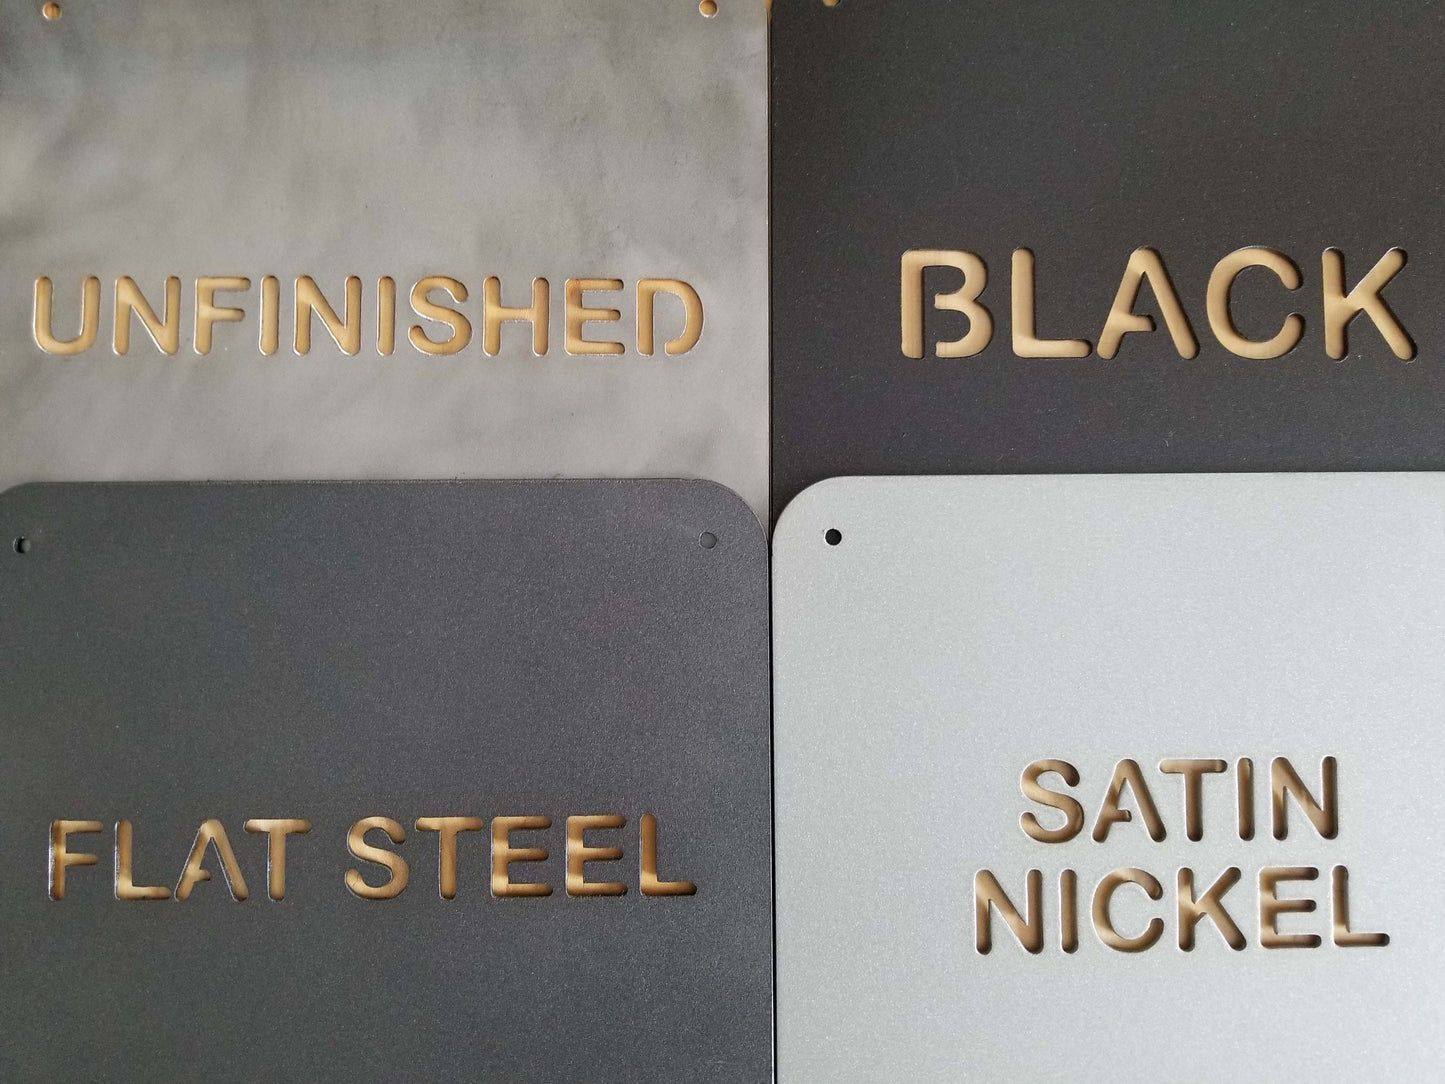 CUSTOM Metal Family Name or Child's Name Sign / Personalized